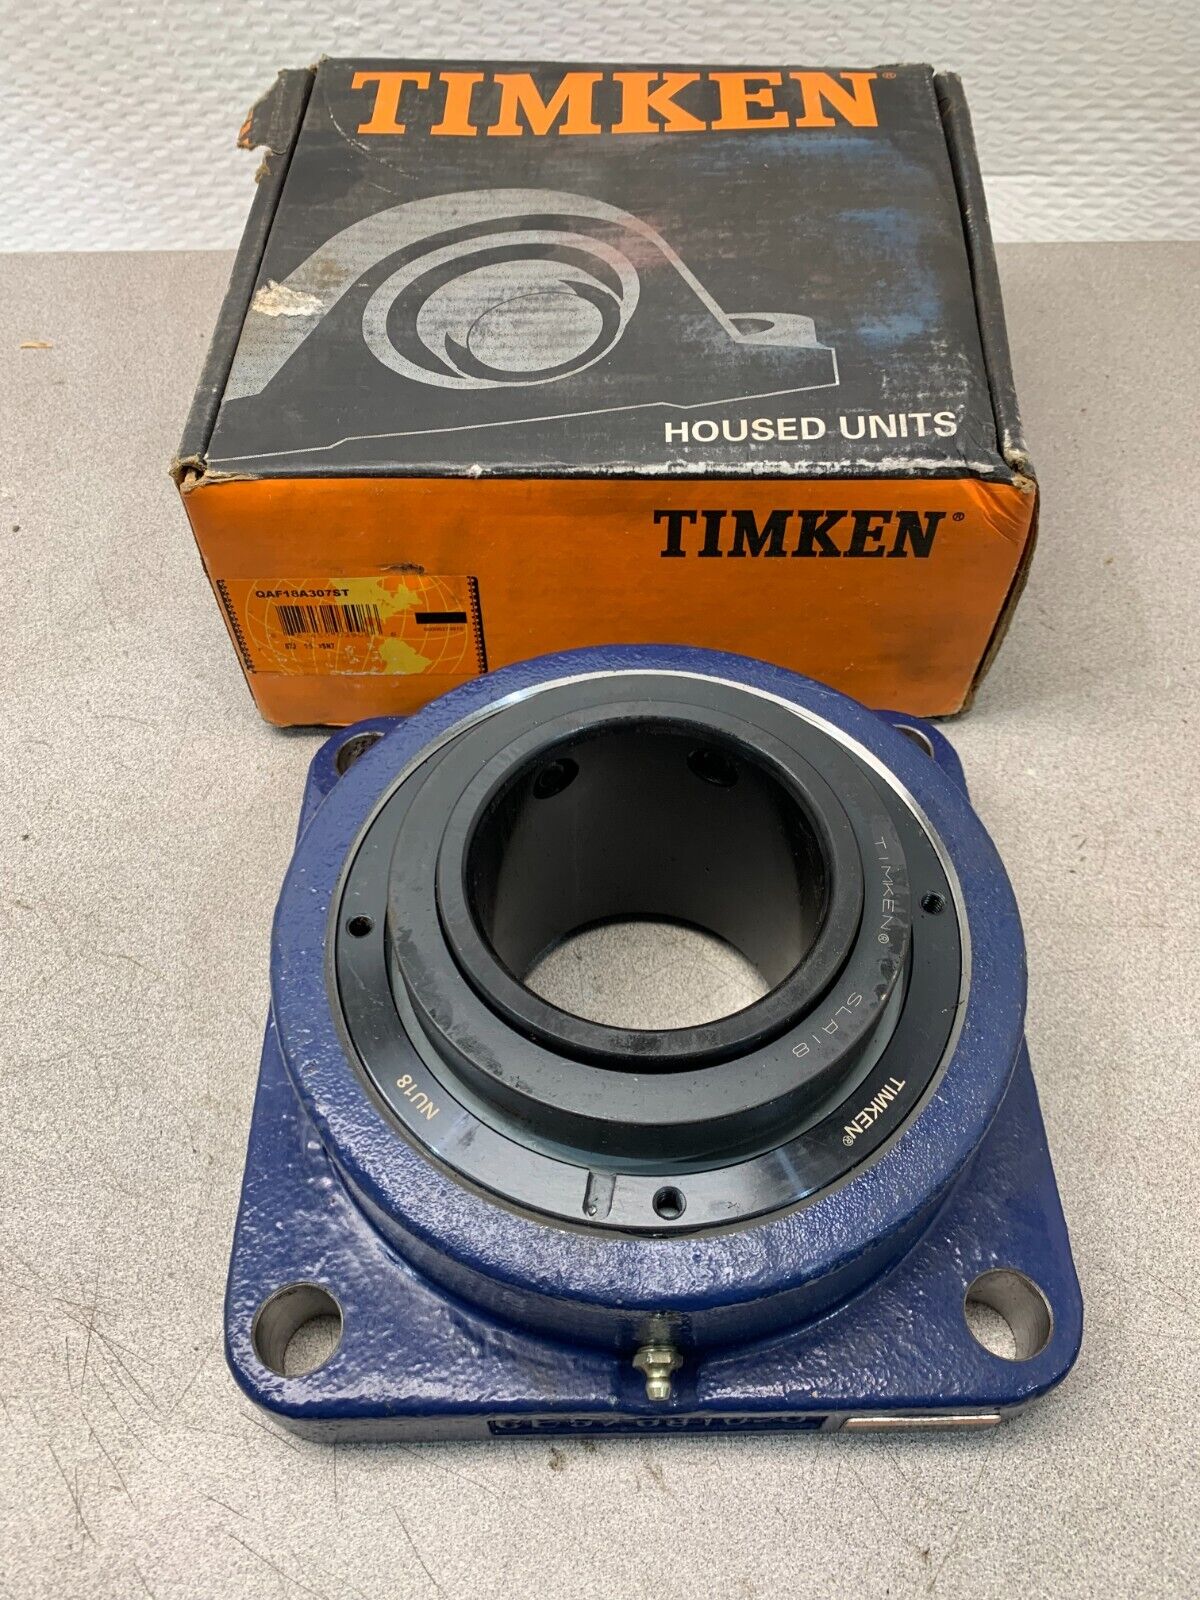 NEW IN BOX TIMKEN 4-BOLT FLANGE BEARING 3-7/16" BORE QAF18A307ST